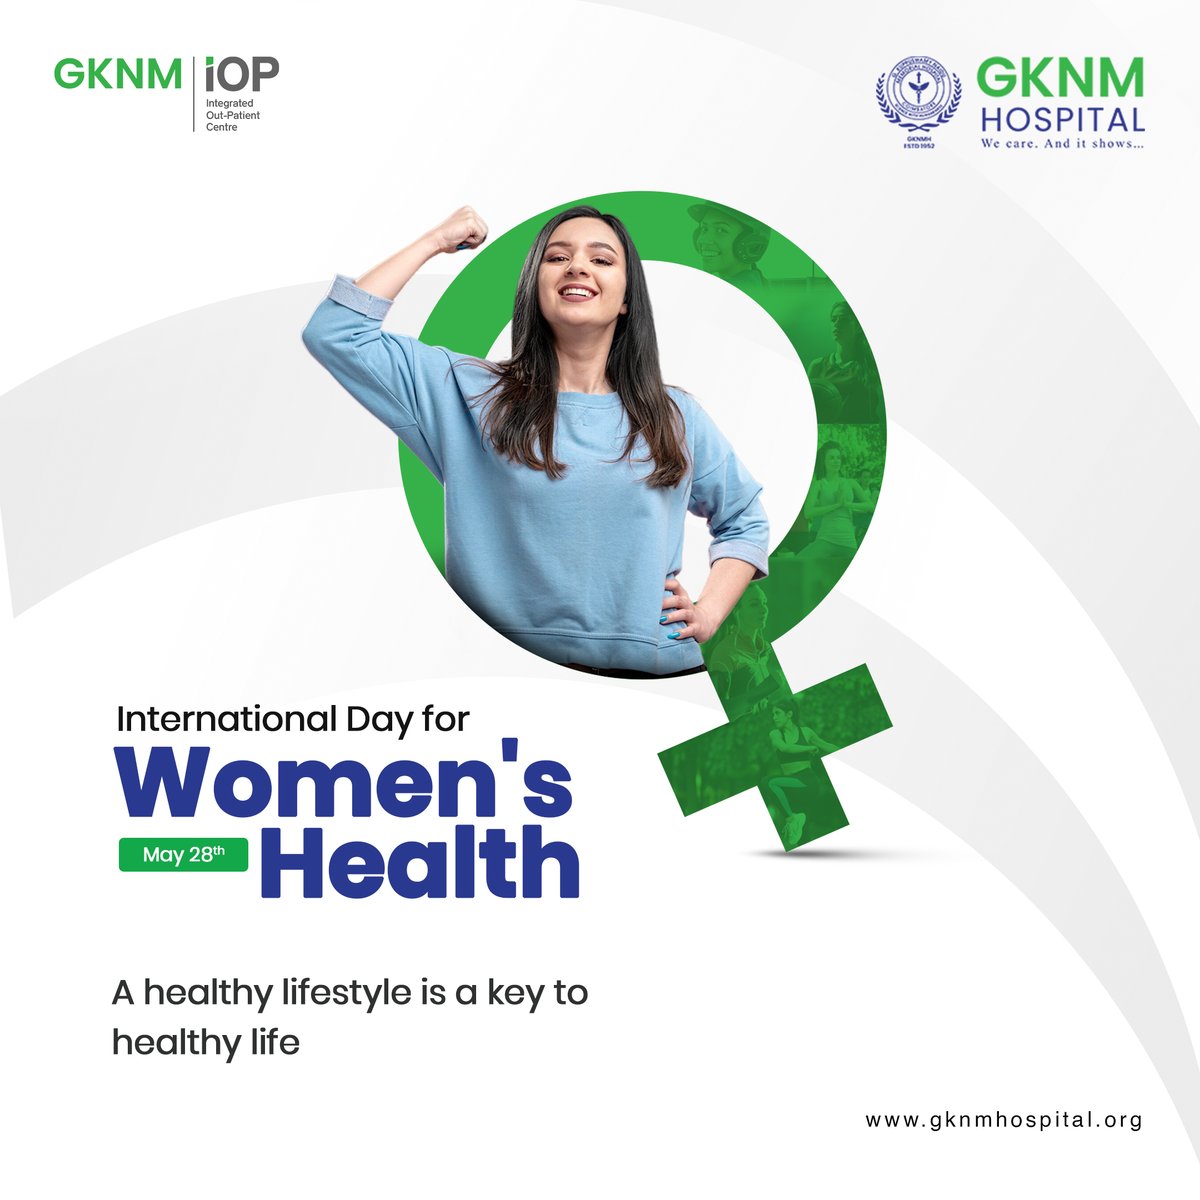 Every woman needs to take the necessary steps for a healthy lifestyle. A holistic and comprehensive approach is needed to achieve better health in #women. #InternationalDayofActionforWomensHealth #May28 #WomensHealth #WomensHealthMatters #GKNM #GKNMH #GKNMiOP #GKNMHospital